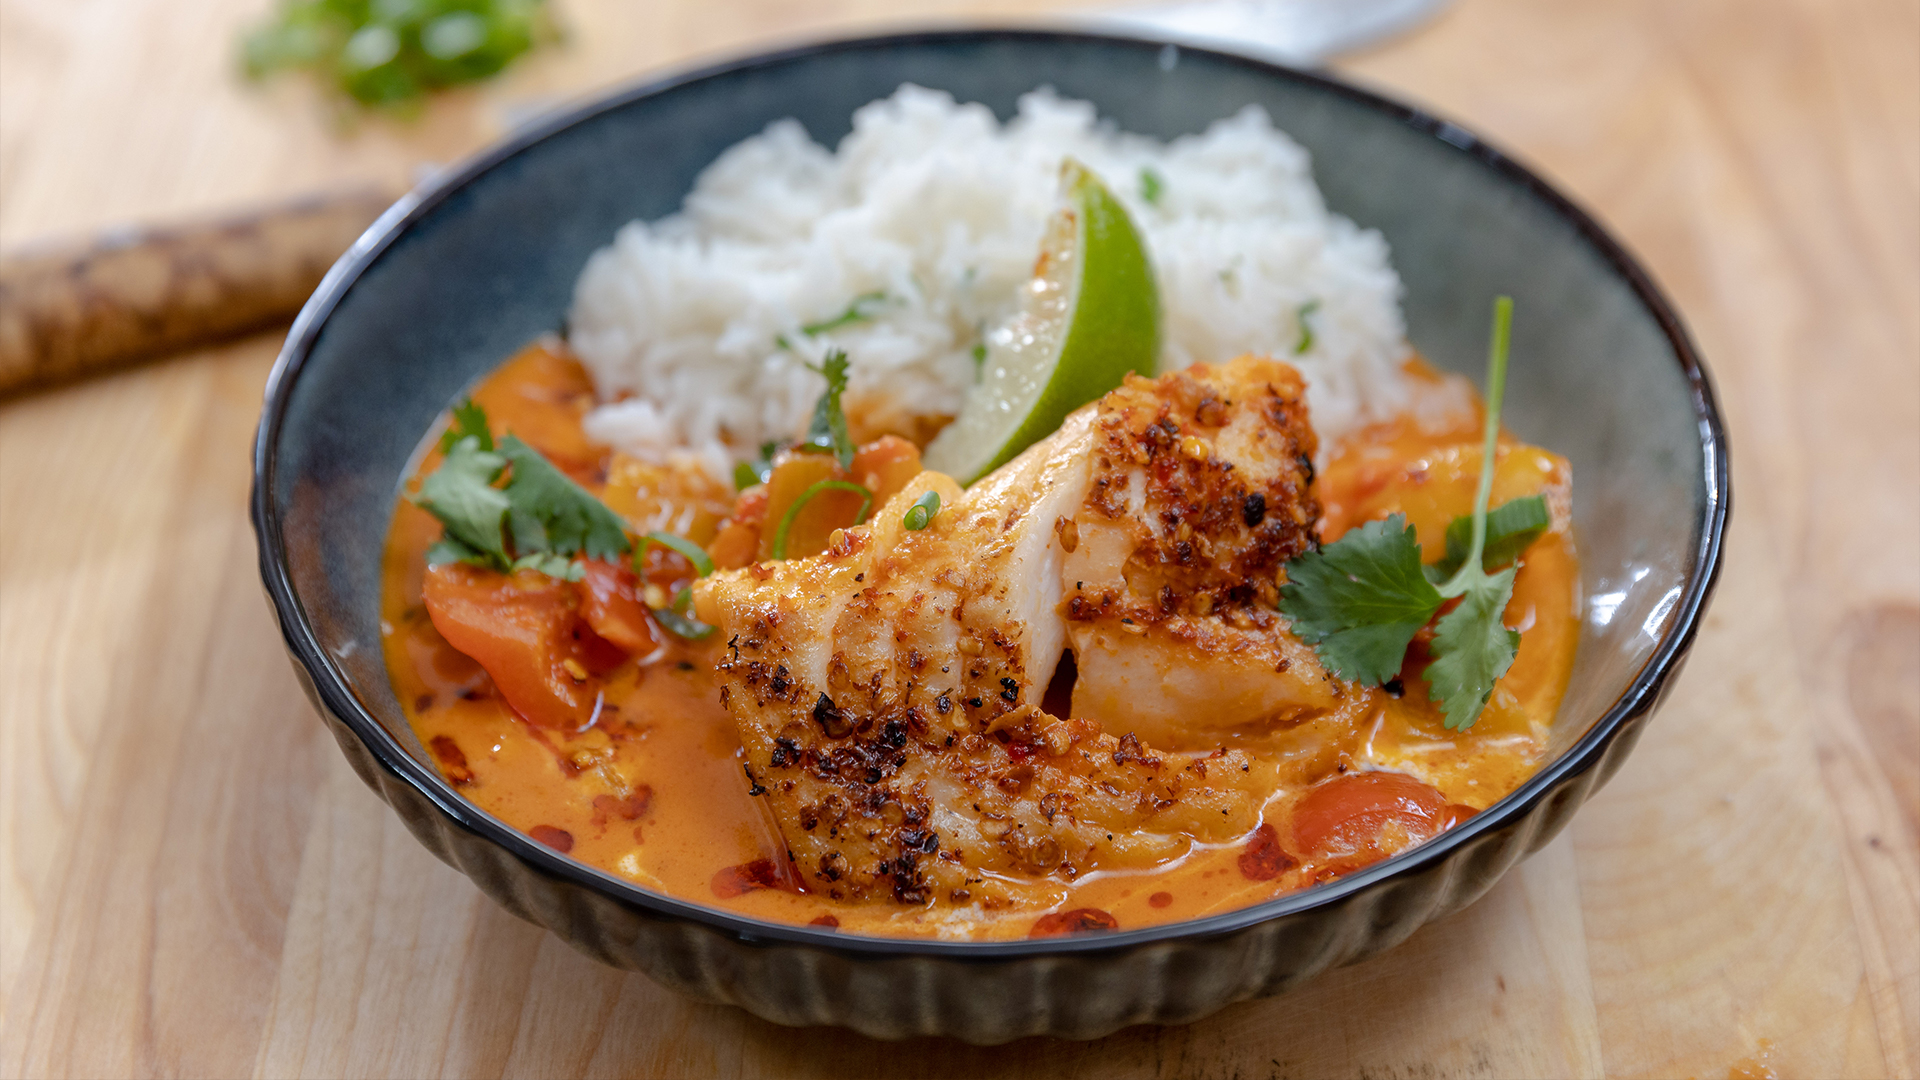 Halibut and shrimp moqueca with spicy coconut broth and garlic scented rice